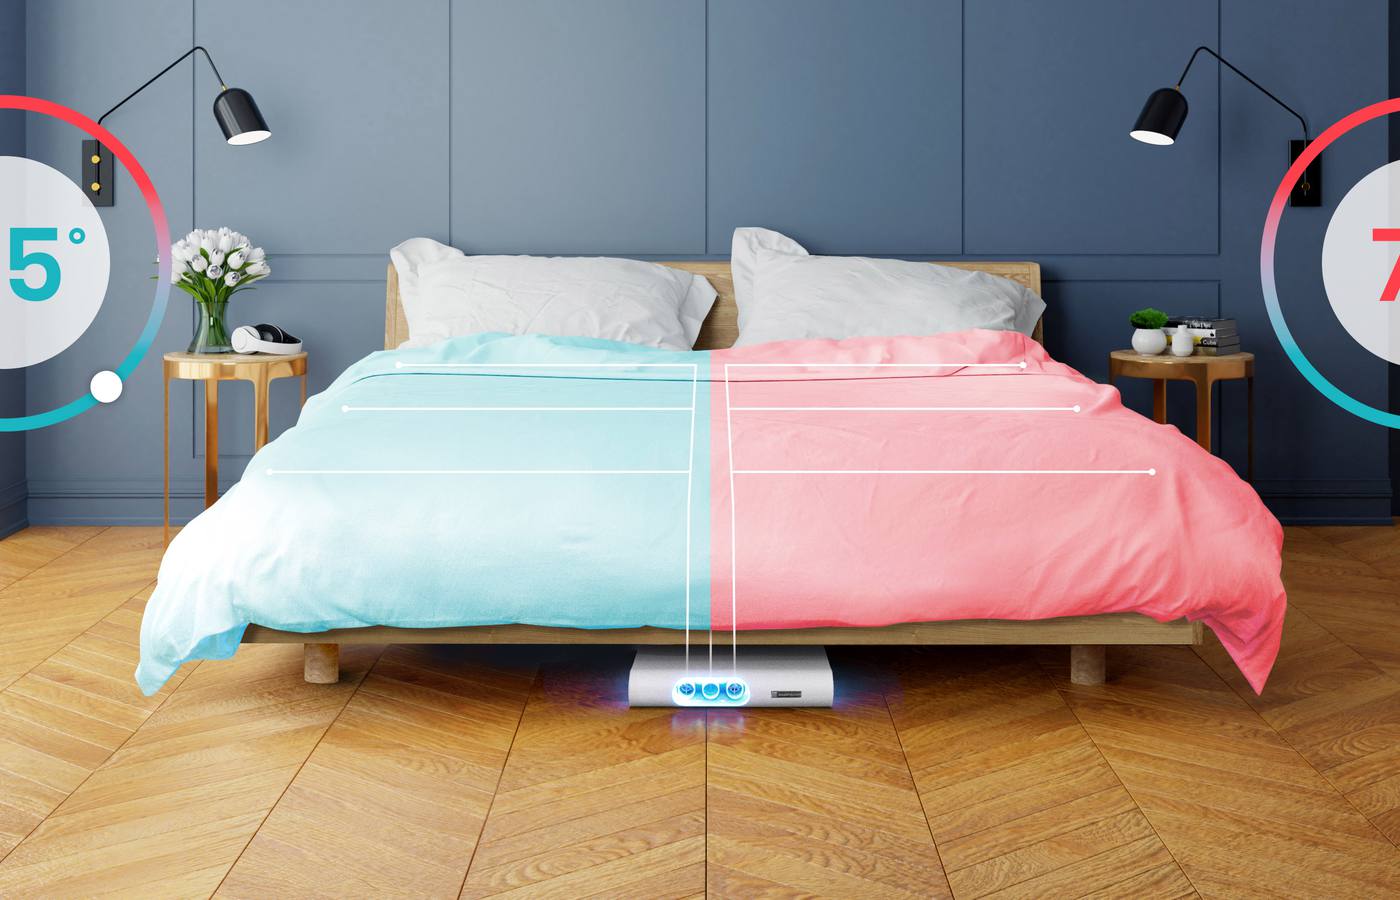 The Dual Zone Smartduvet: What Does It Do and Do I Need One?